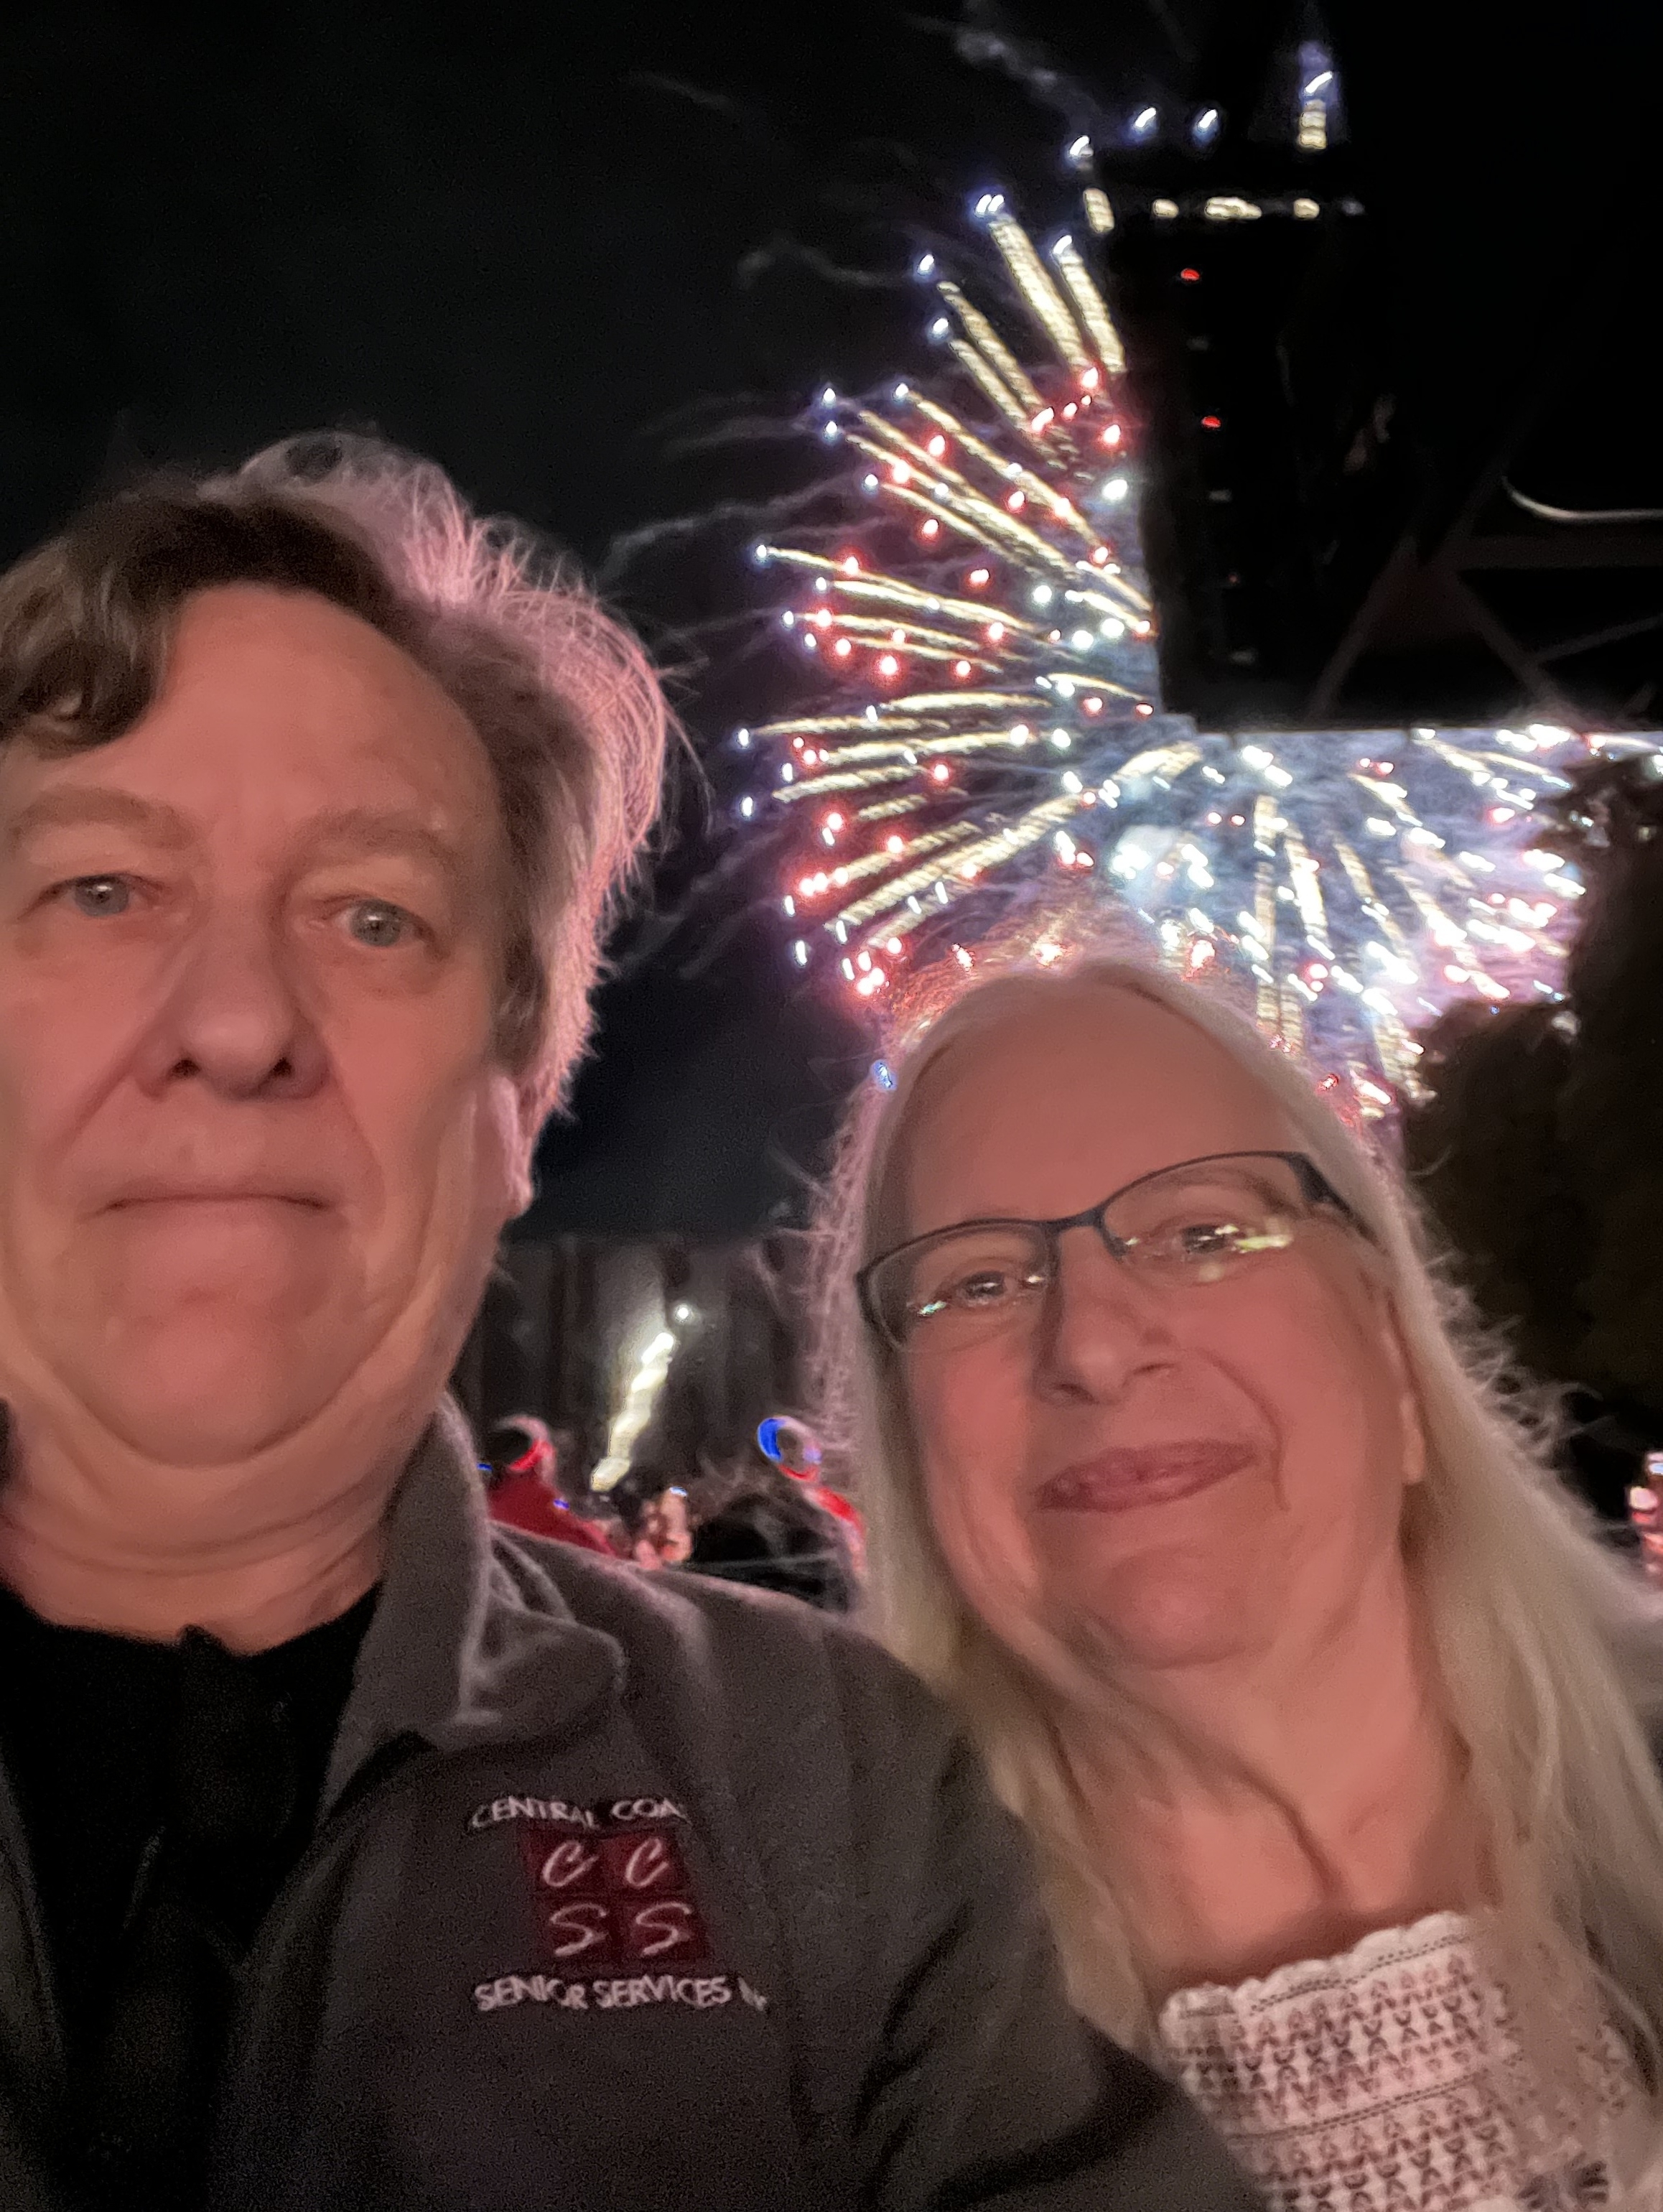 San Francisco Symphony 4th of July With Fireworks